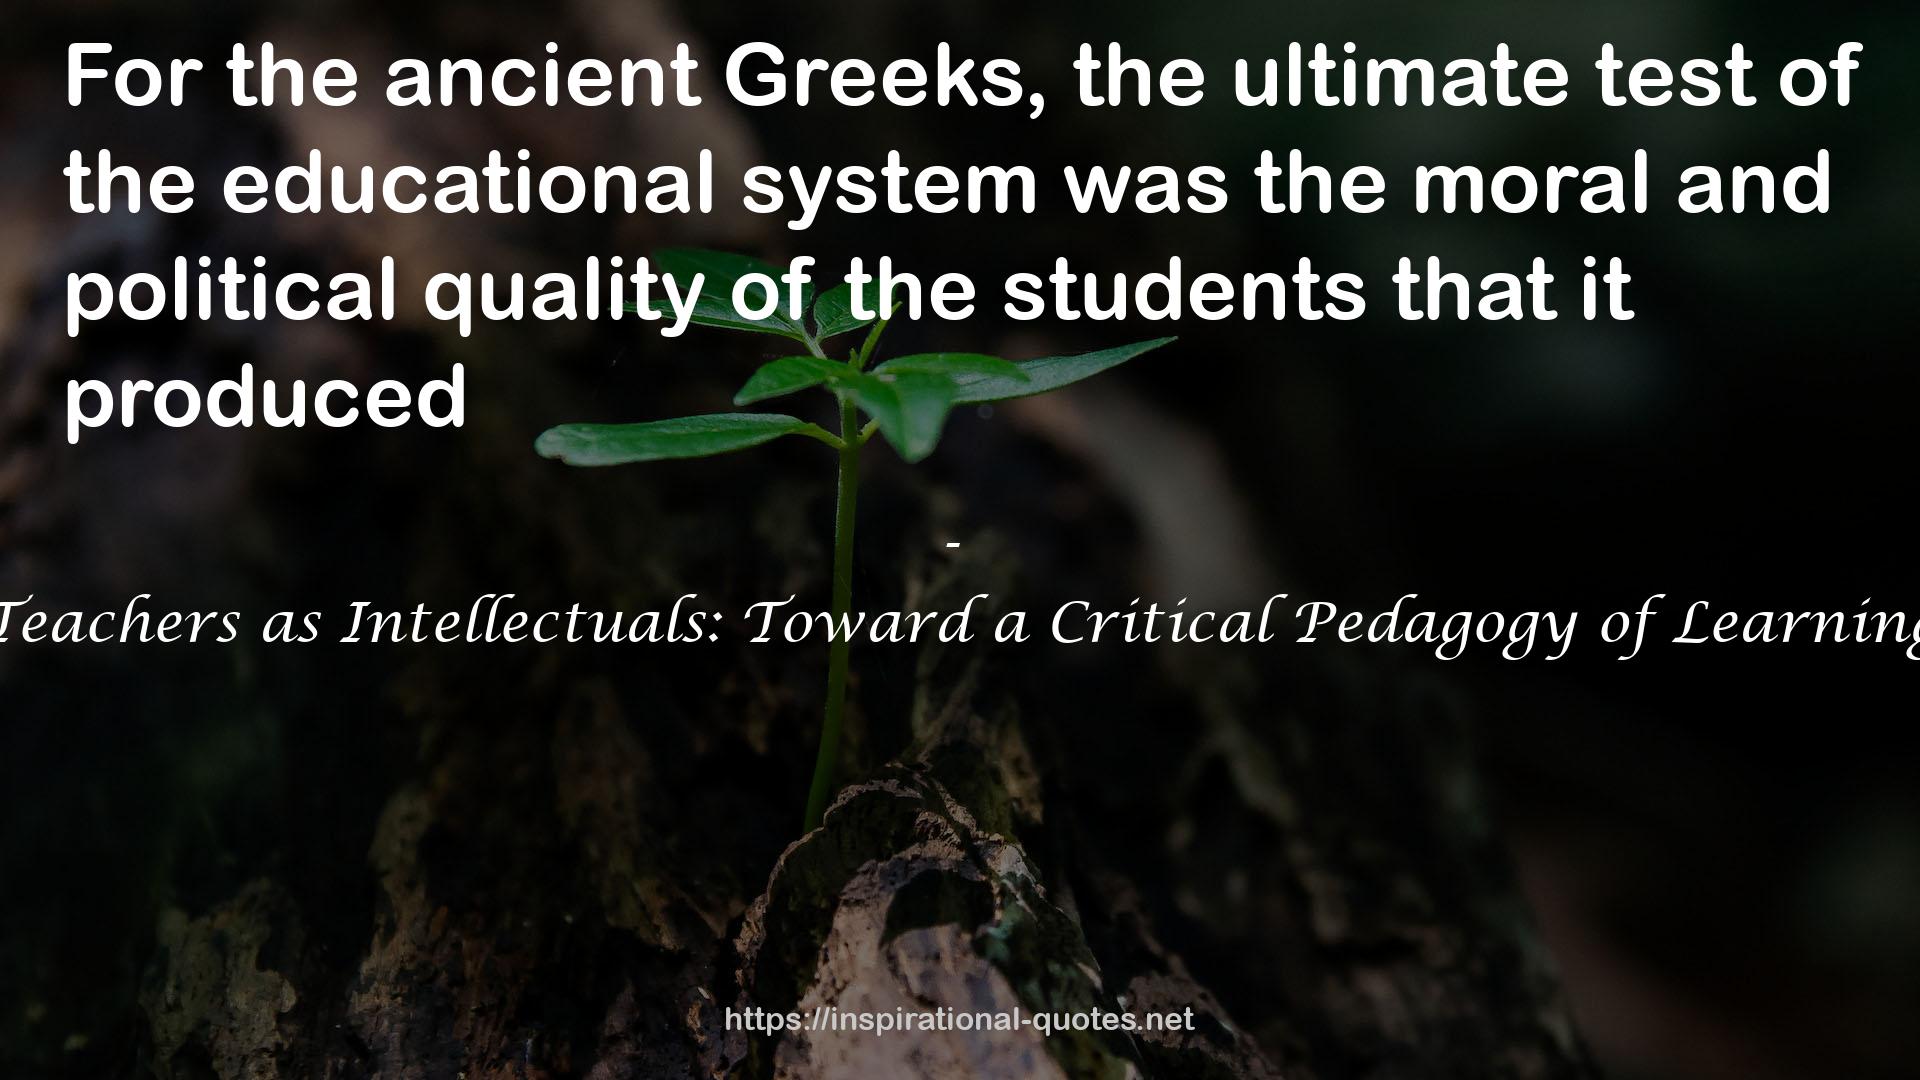 Teachers as Intellectuals: Toward a Critical Pedagogy of Learning QUOTES